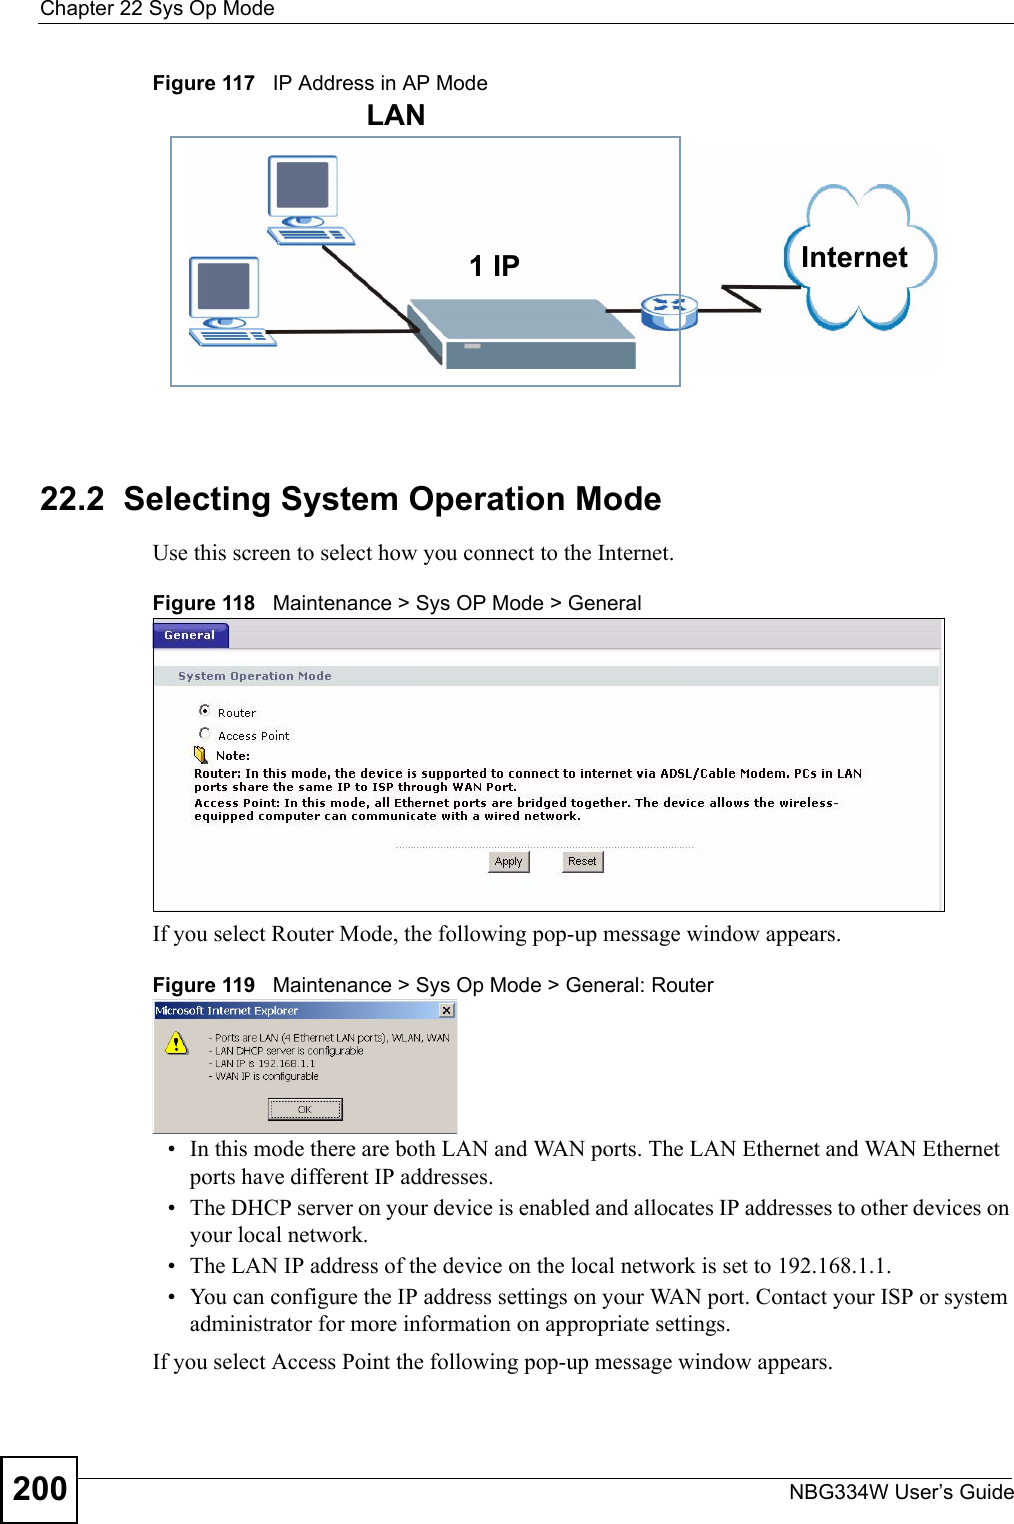 Chapter 22 Sys Op ModeNBG334W User’s Guide200Figure 117   IP Address in AP Mode22.2  Selecting System Operation ModeUse this screen to select how you connect to the Internet. Figure 118   Maintenance &gt; Sys OP Mode &gt; General If you select Router Mode, the following pop-up message window appears.Figure 119   Maintenance &gt; Sys Op Mode &gt; General: Router • In this mode there are both LAN and WAN ports. The LAN Ethernet and WAN Ethernet ports have different IP addresses. • The DHCP server on your device is enabled and allocates IP addresses to other devices on your local network. • The LAN IP address of the device on the local network is set to 192.168.1.1.• You can configure the IP address settings on your WAN port. Contact your ISP or system administrator for more information on appropriate settings.If you select Access Point the following pop-up message window appears.  1 IPLANInternet